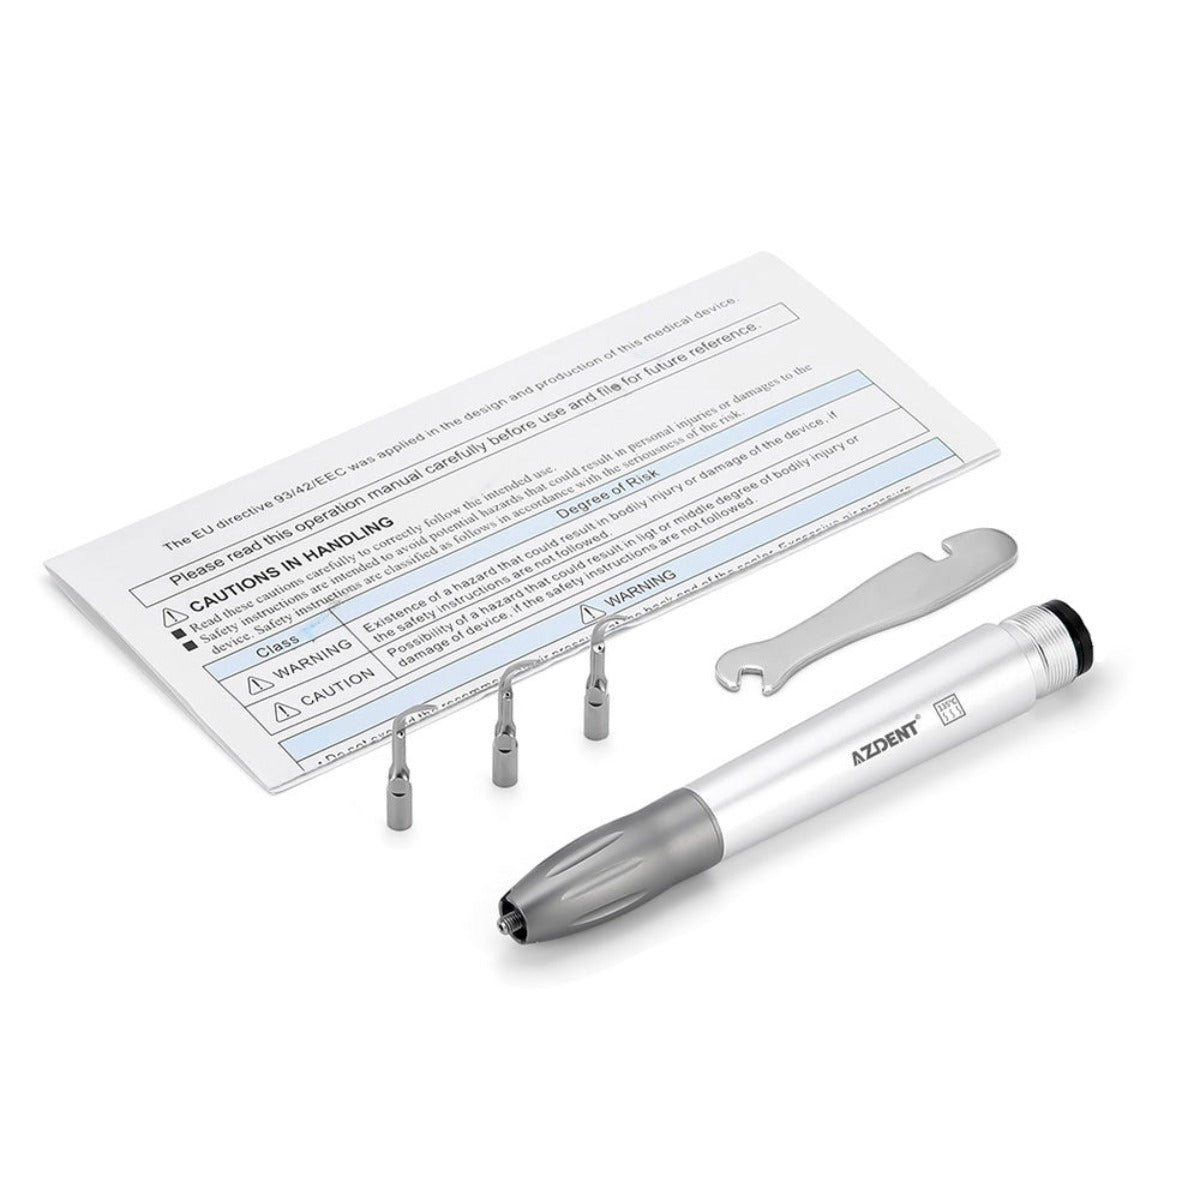 2/4 Holes Dental Air Scaler Handpiece Super Sonic Scaling Handle with 3 Tips (G1,G2,G4) - pairaydental.com